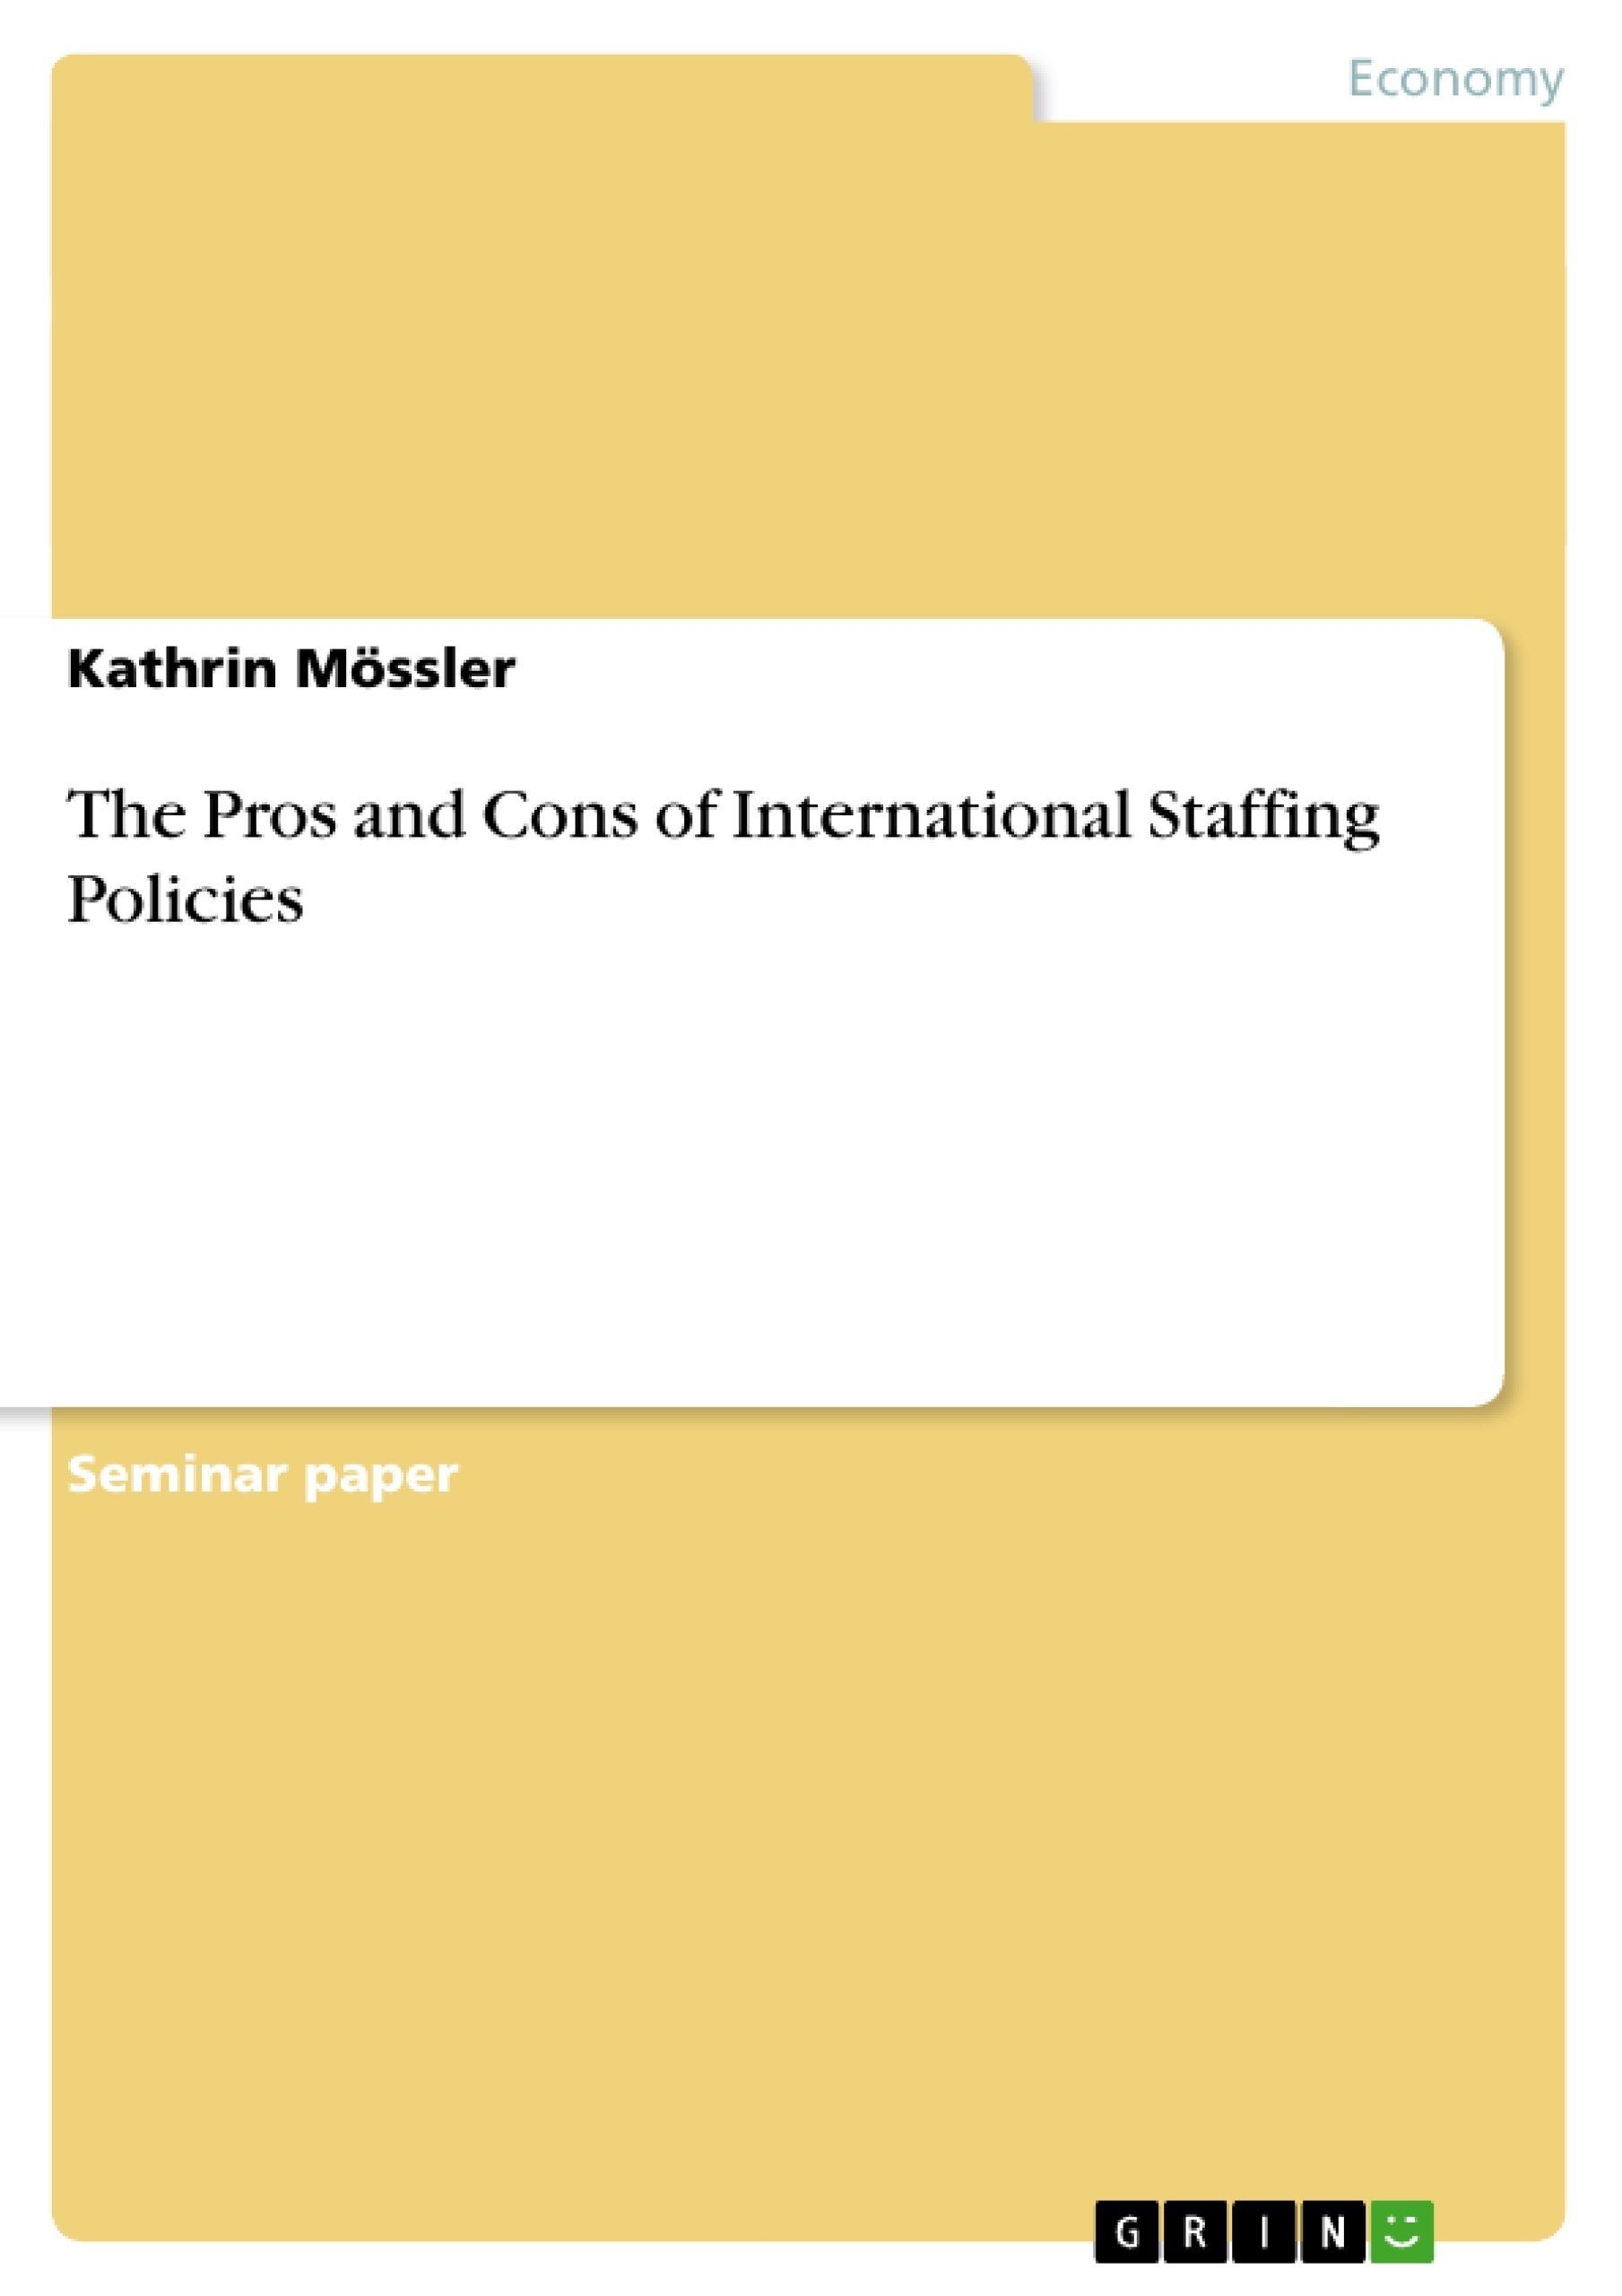 Title: The Pros and Cons of International Staffing Policies